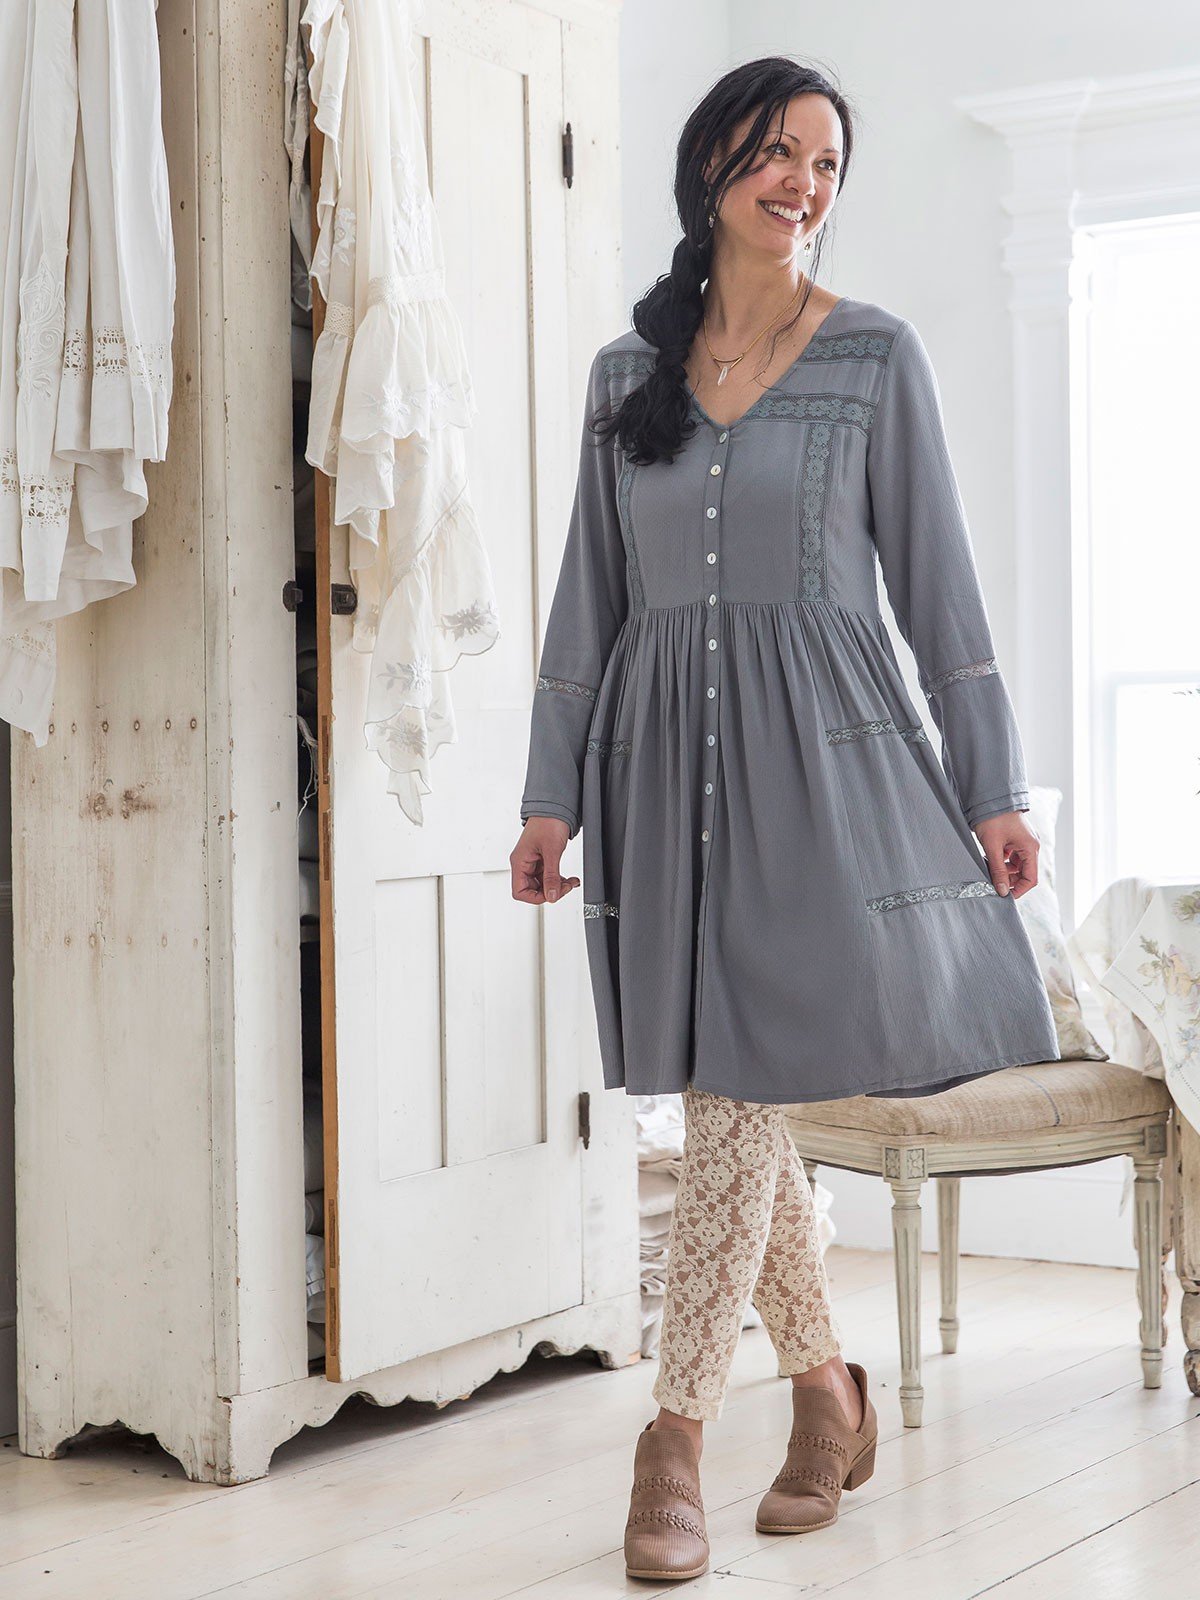 Minuet Tunic in Smoky Quartz | April Cornell - SOLD OUT